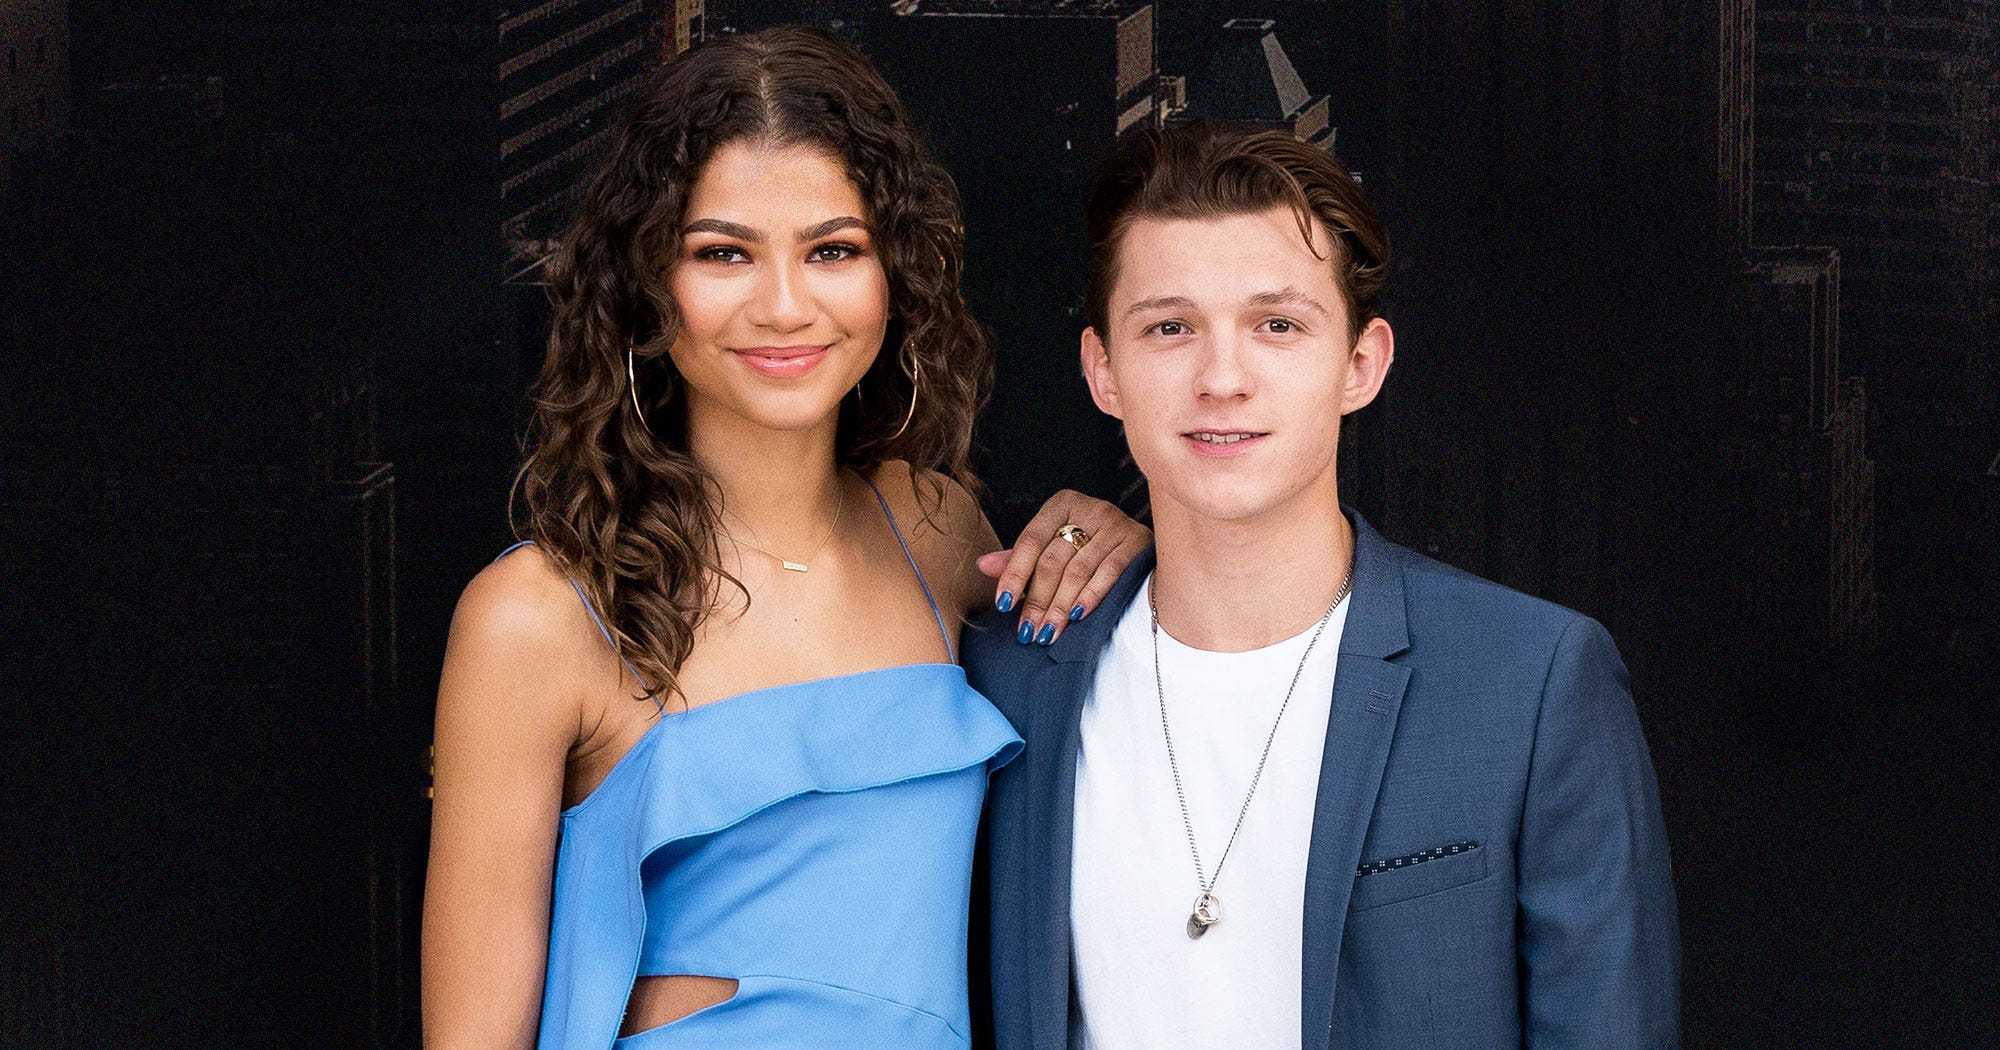 A moment robbed: Tom Holland and Zendaya reflect on their stolen privacy